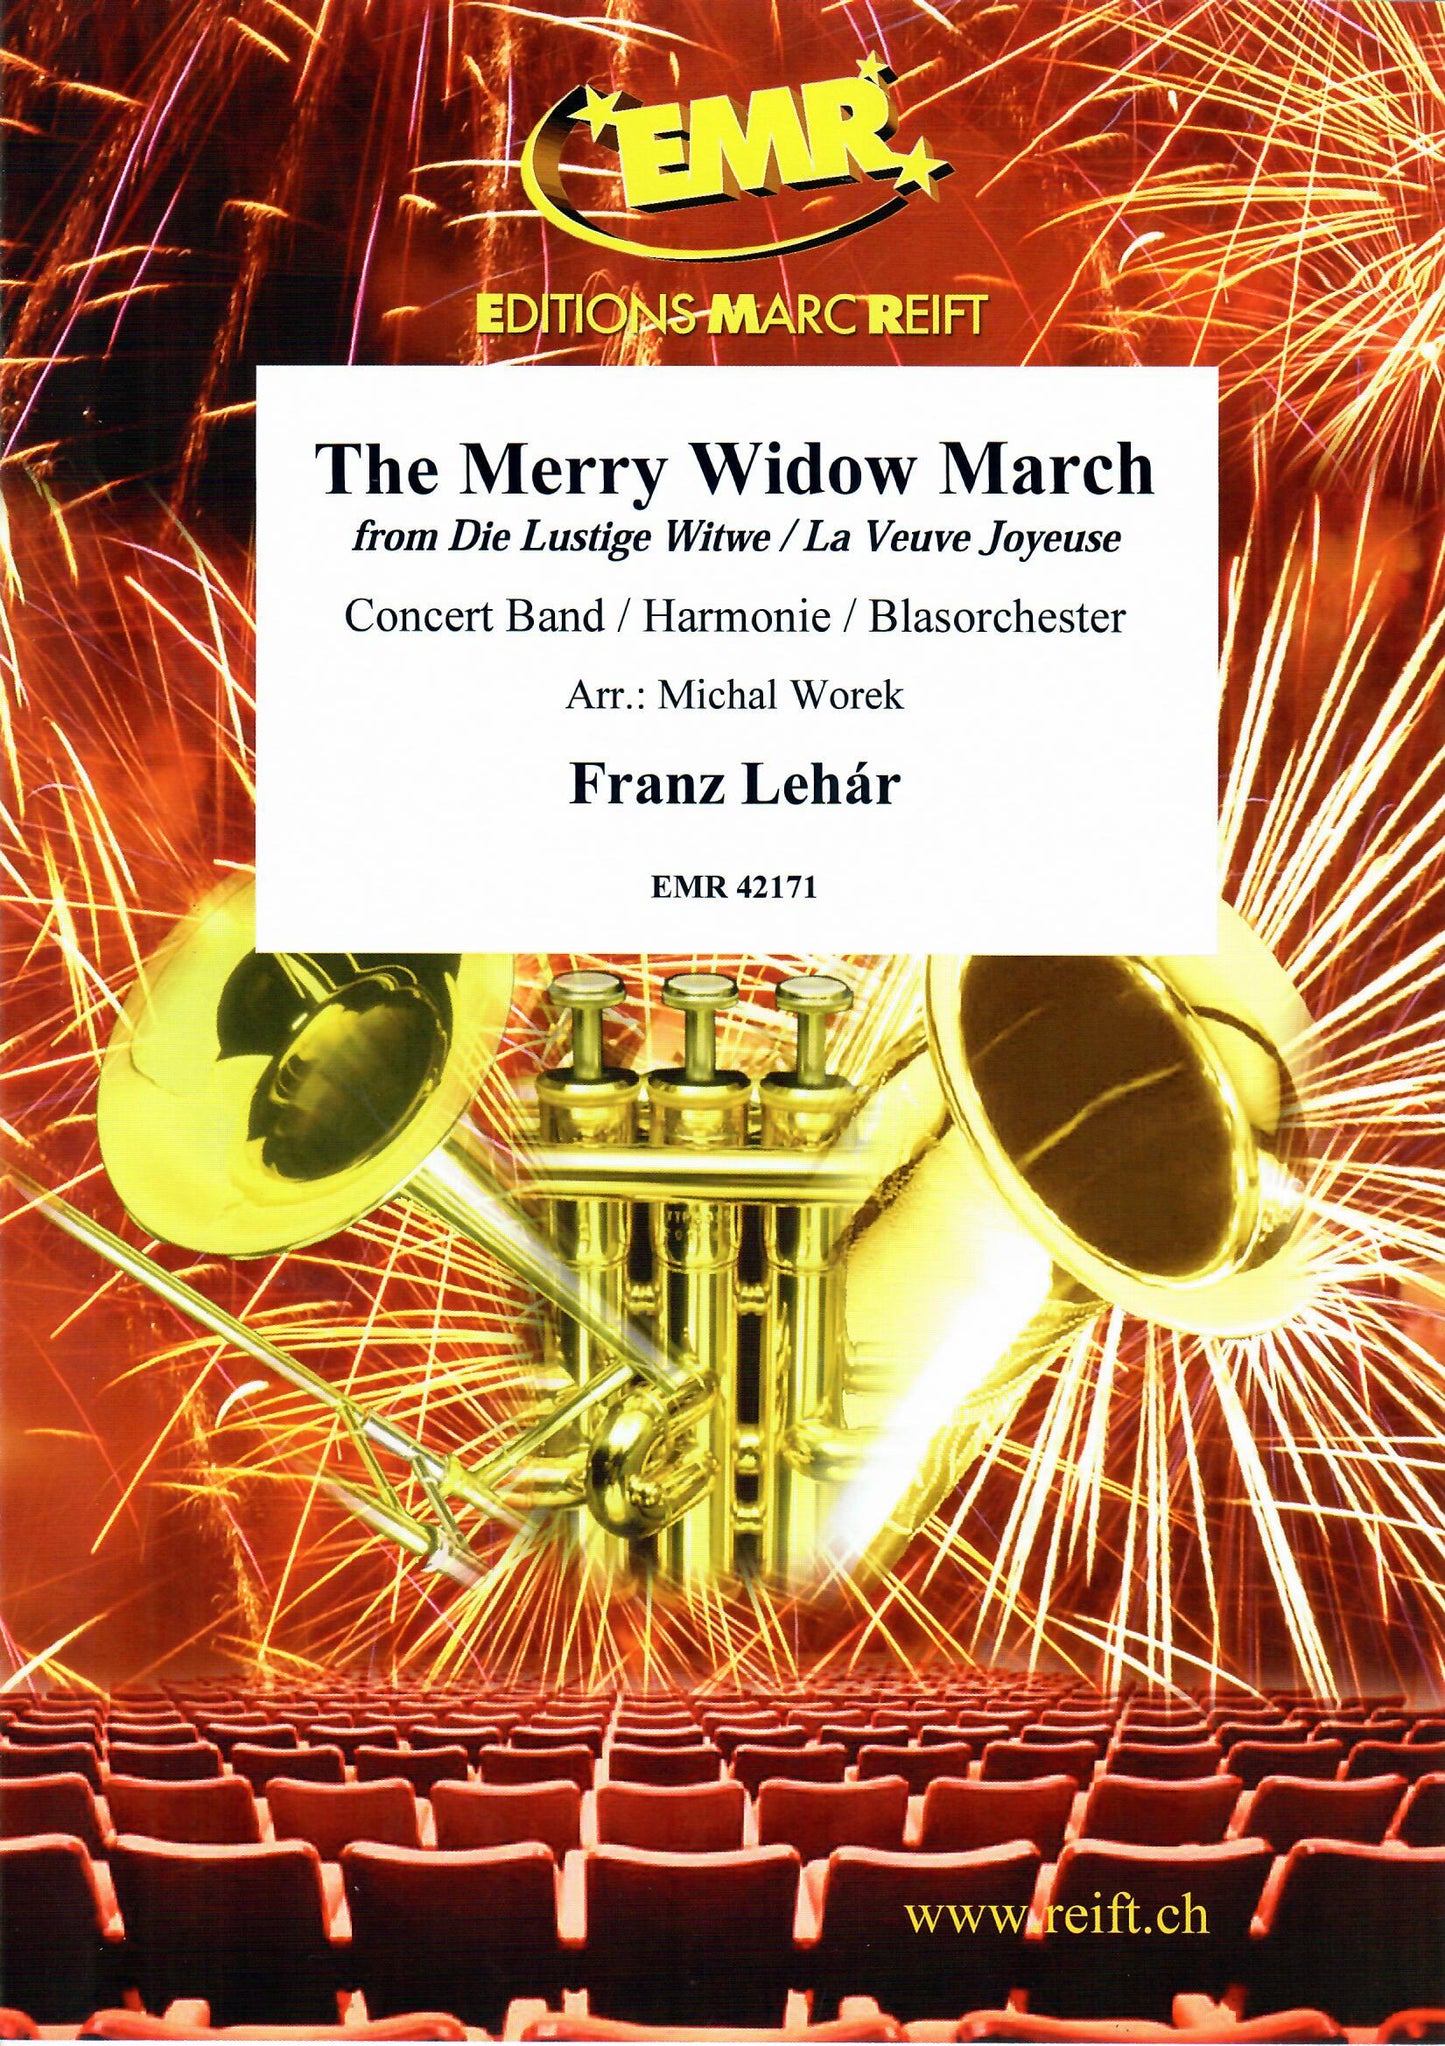 The Merry Widow March